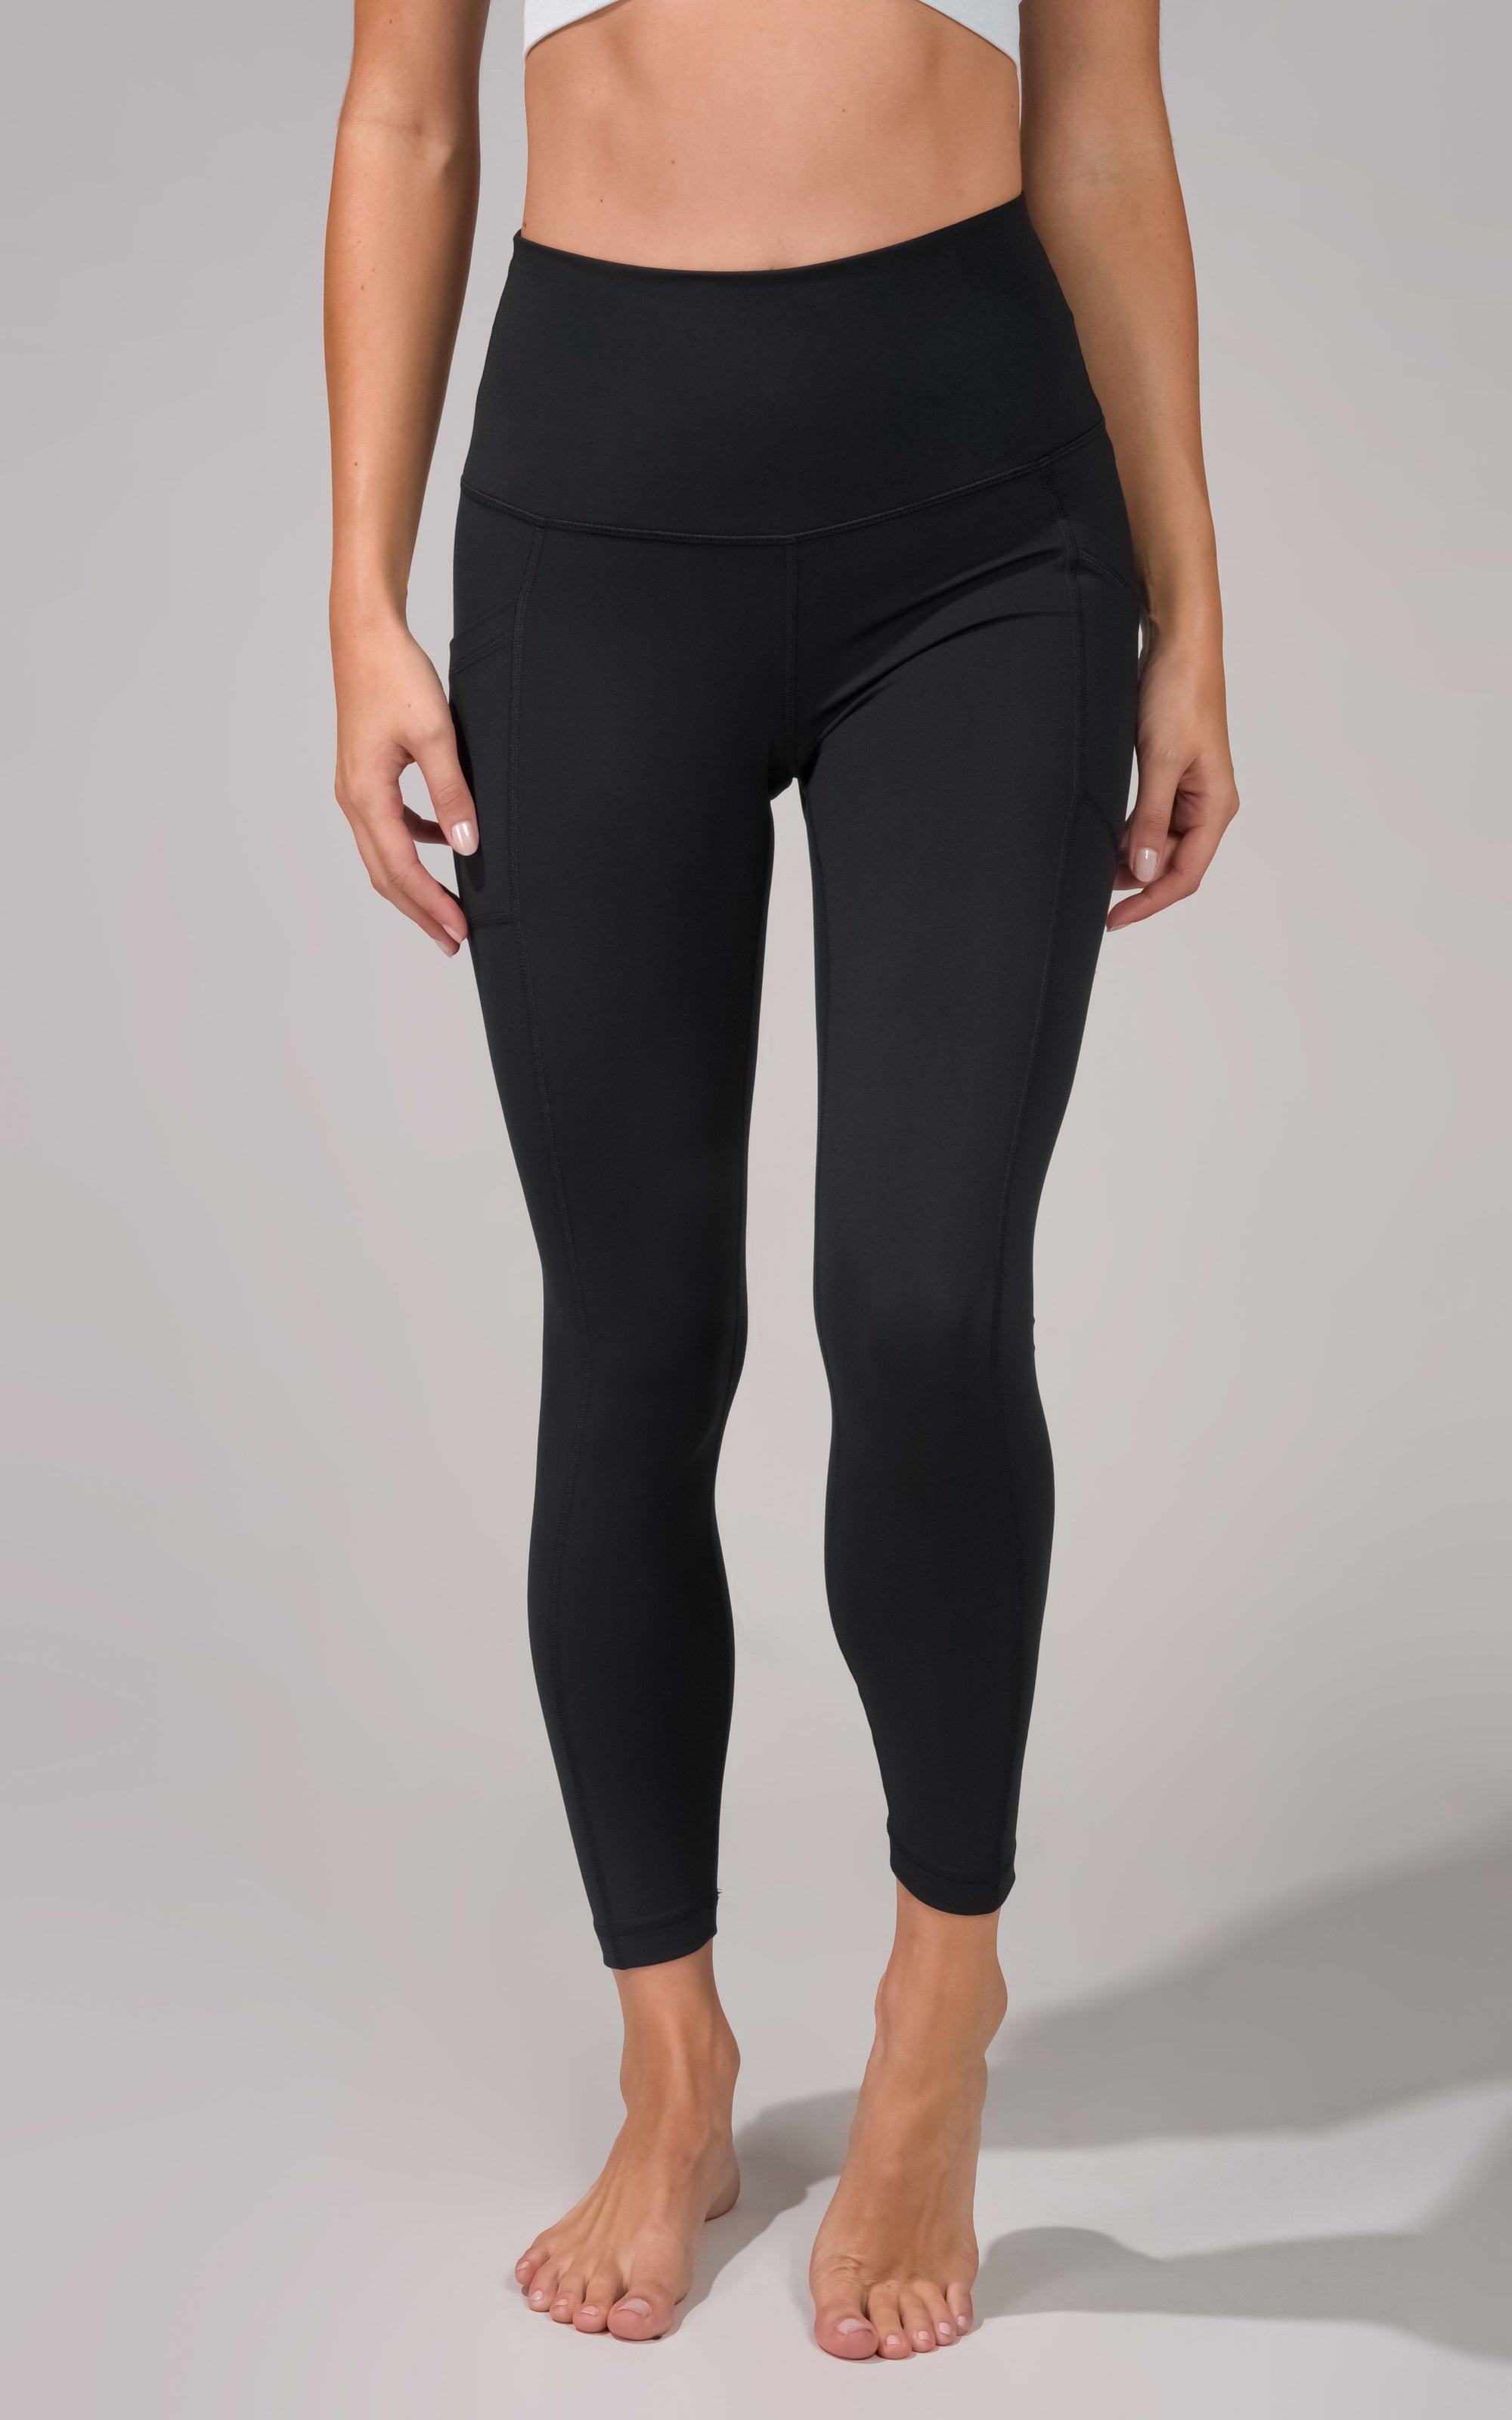 Yogalicious LUX} High Waist Ankle Length Leggings in Black